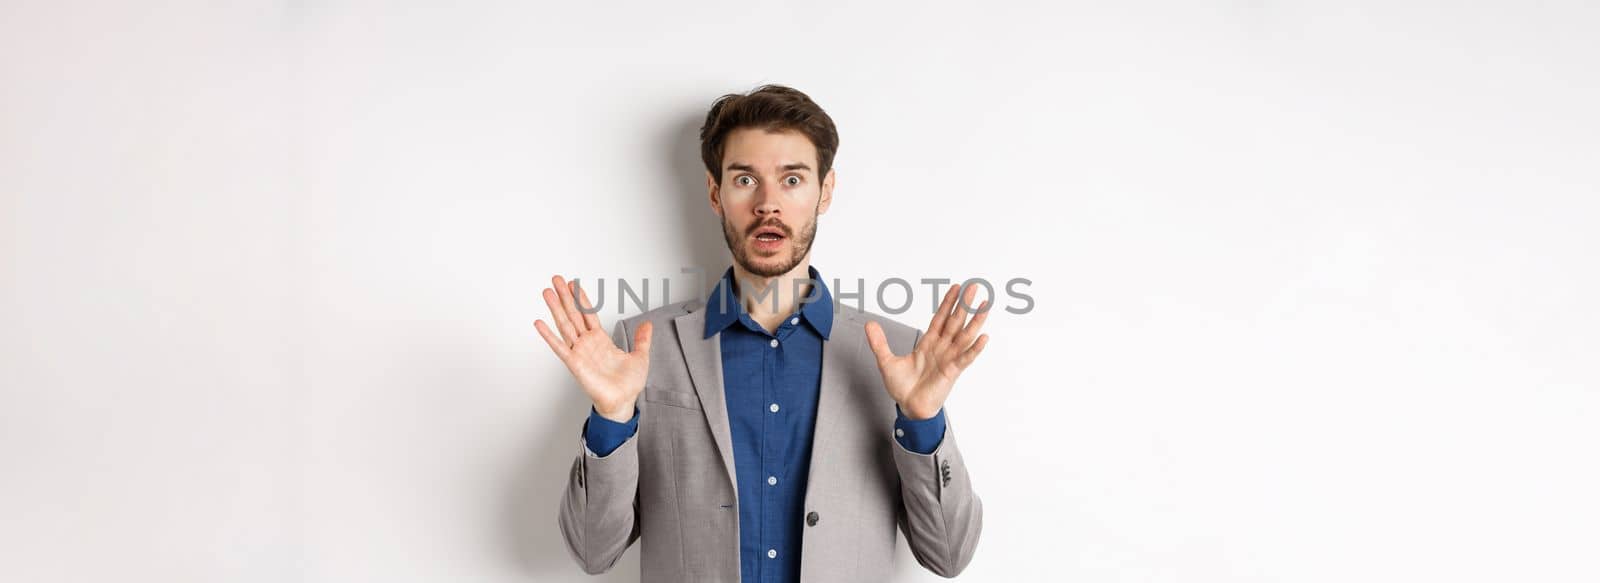 Surprised businessman in suit raising hands up and look excited, standing against white background.